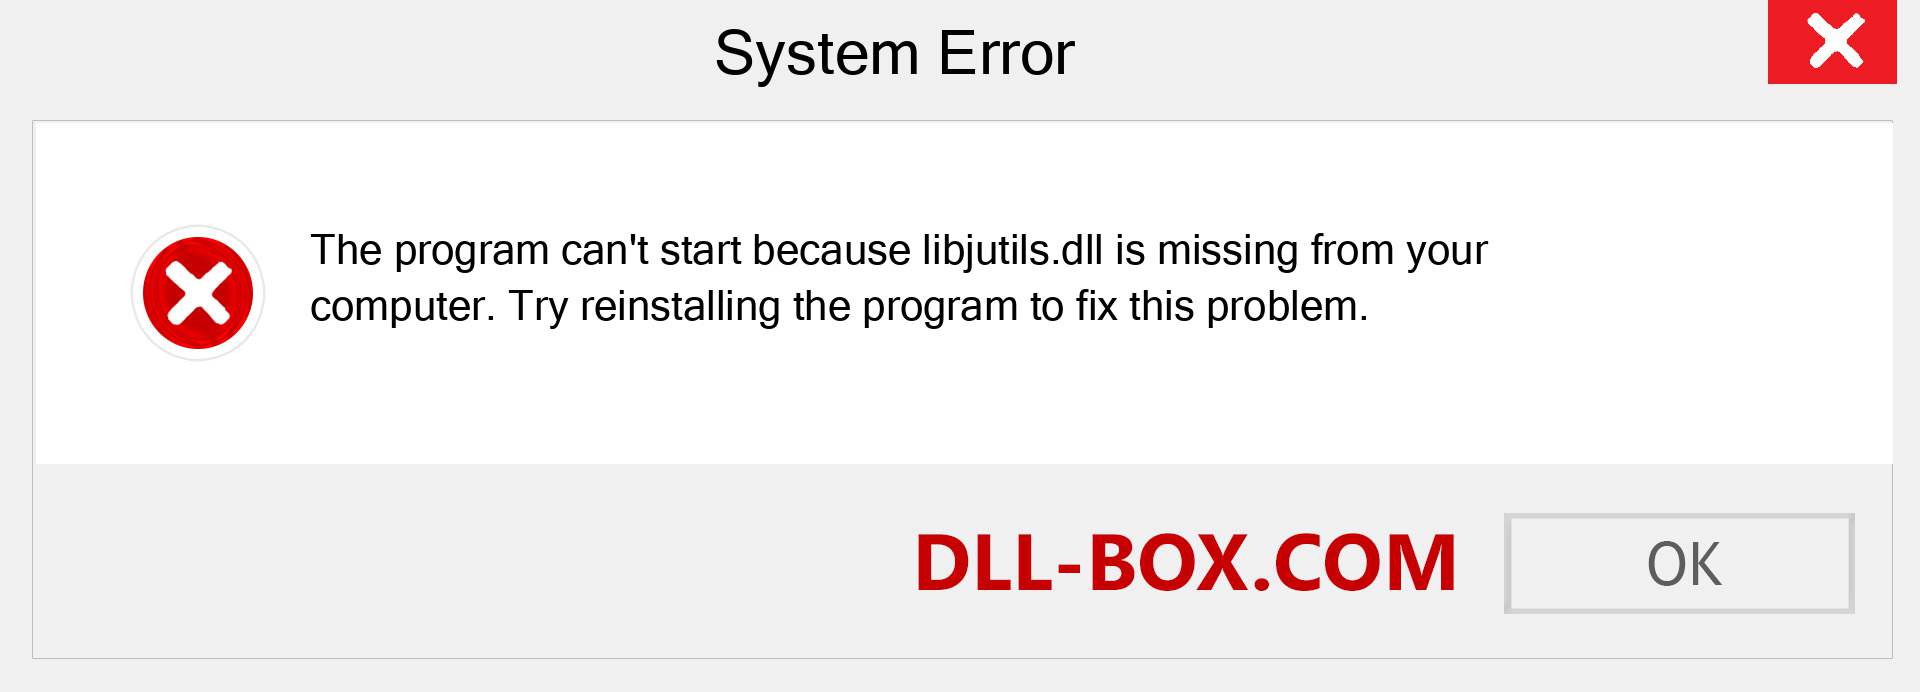  libjutils.dll file is missing?. Download for Windows 7, 8, 10 - Fix  libjutils dll Missing Error on Windows, photos, images